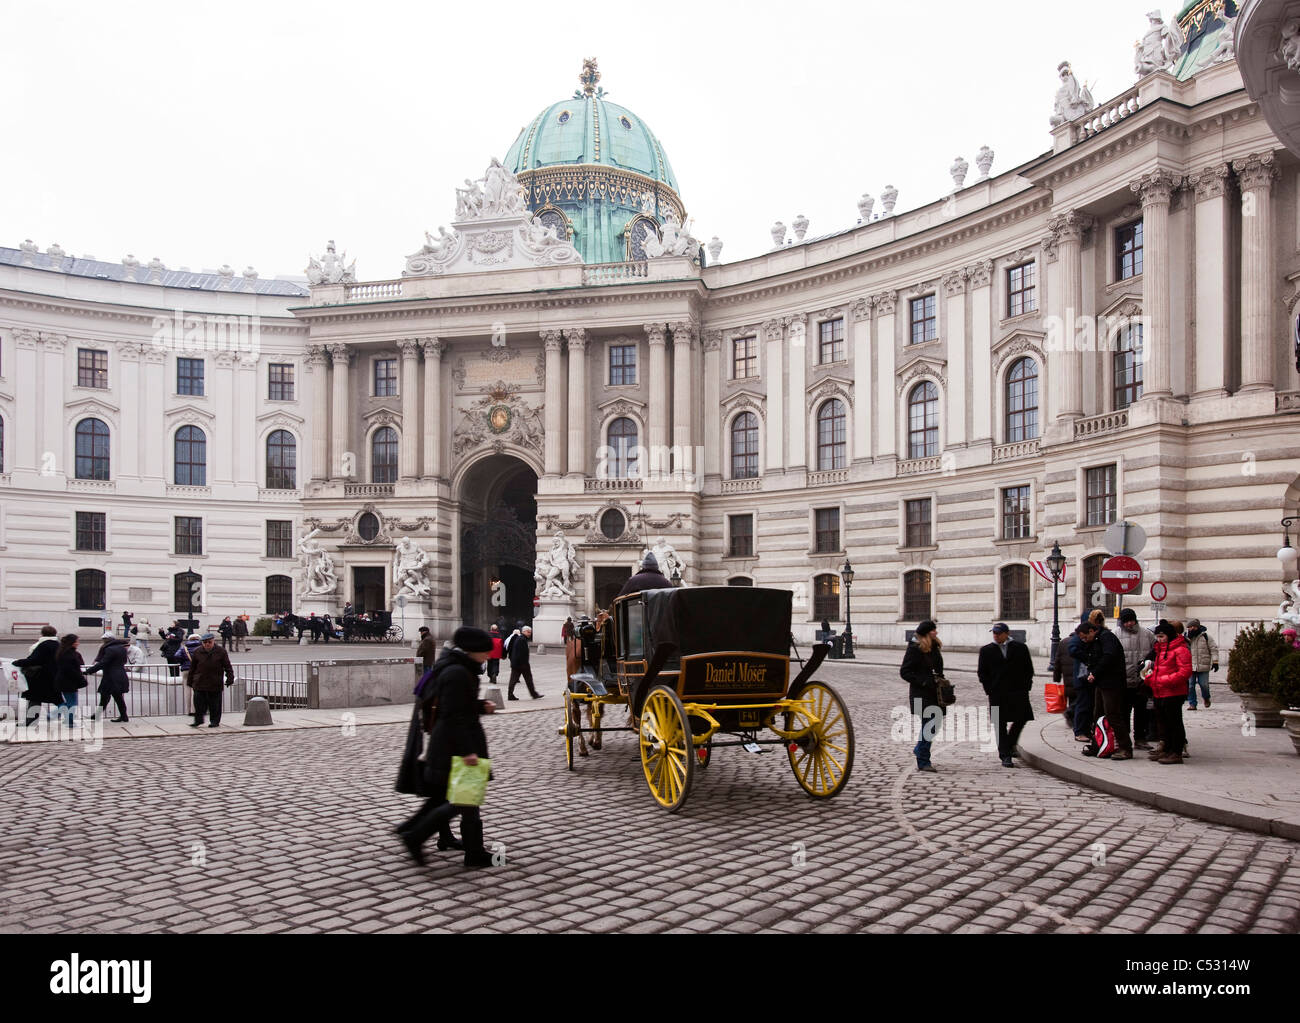 A horse driven carriage crosses in front of the Hofburg Palace in Michaeler Platz. Vienna, Austria. Stock Photo